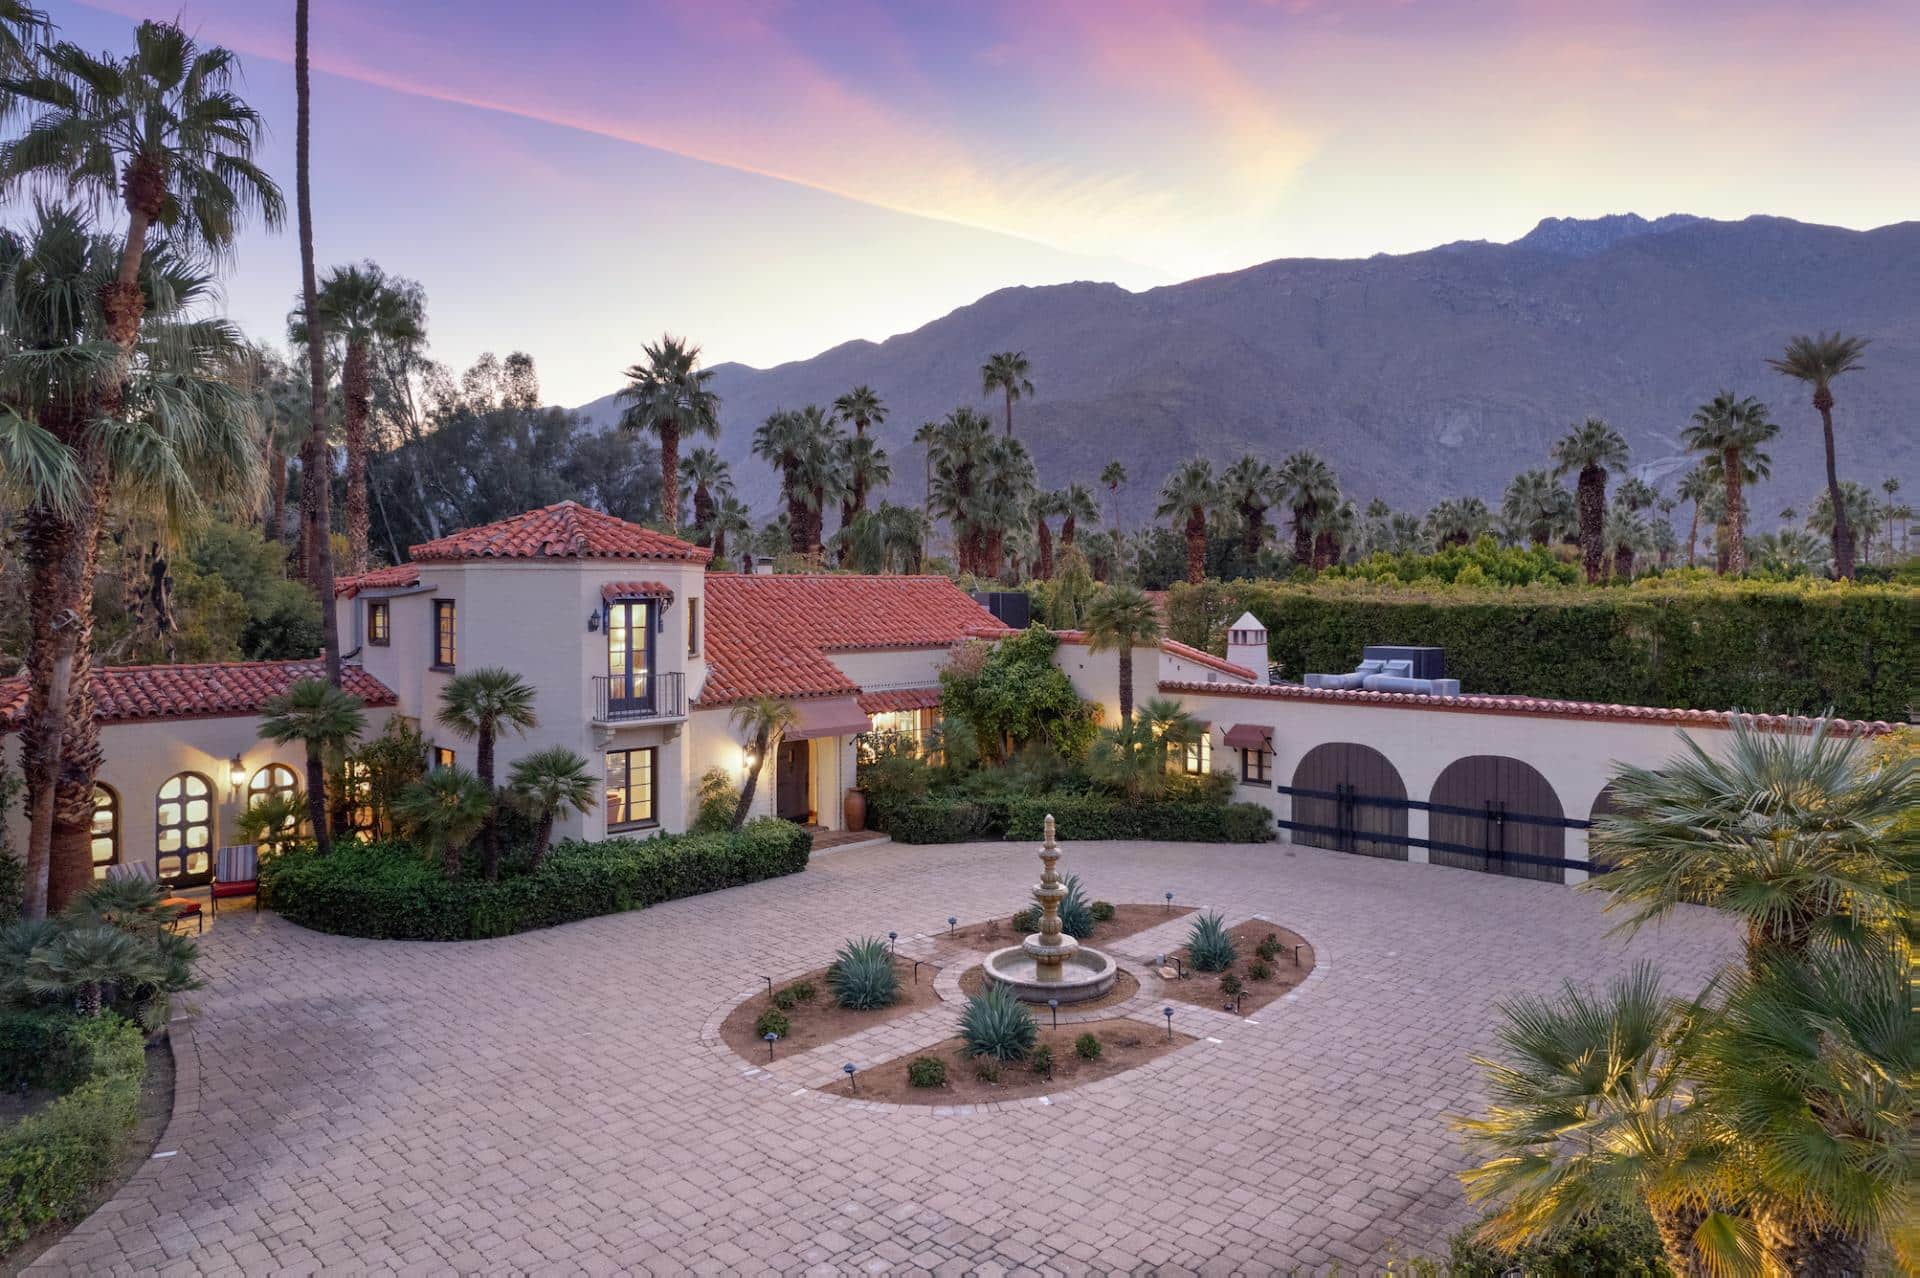 Luxurious Spanish-style villa with red-tile roofs, a fountain in a circular driveway, surrounded by palm trees, with a backdrop of mountainous terrain under a sunset sky.